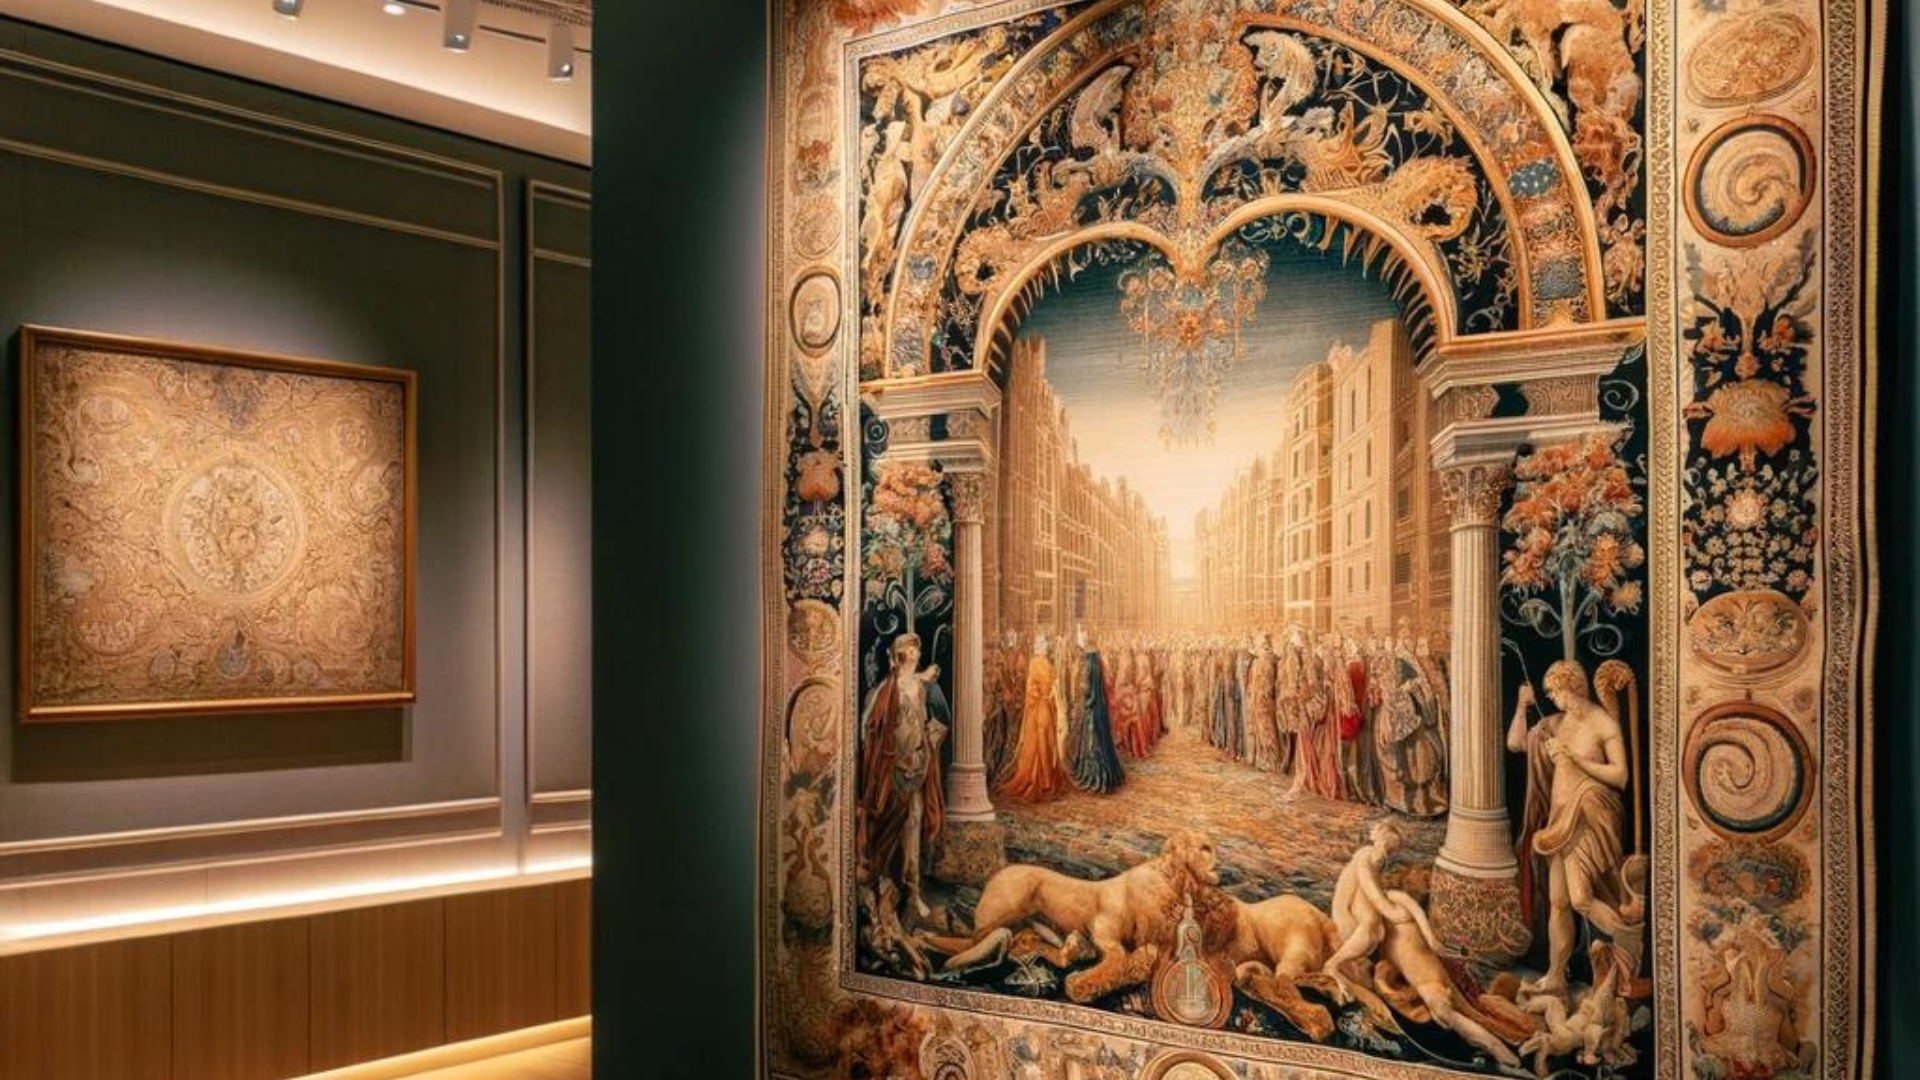 A vibrant and intricately designed tapestry displayed in a museum, illuminated by soft lighting, with a descriptive plaque providing historical context.